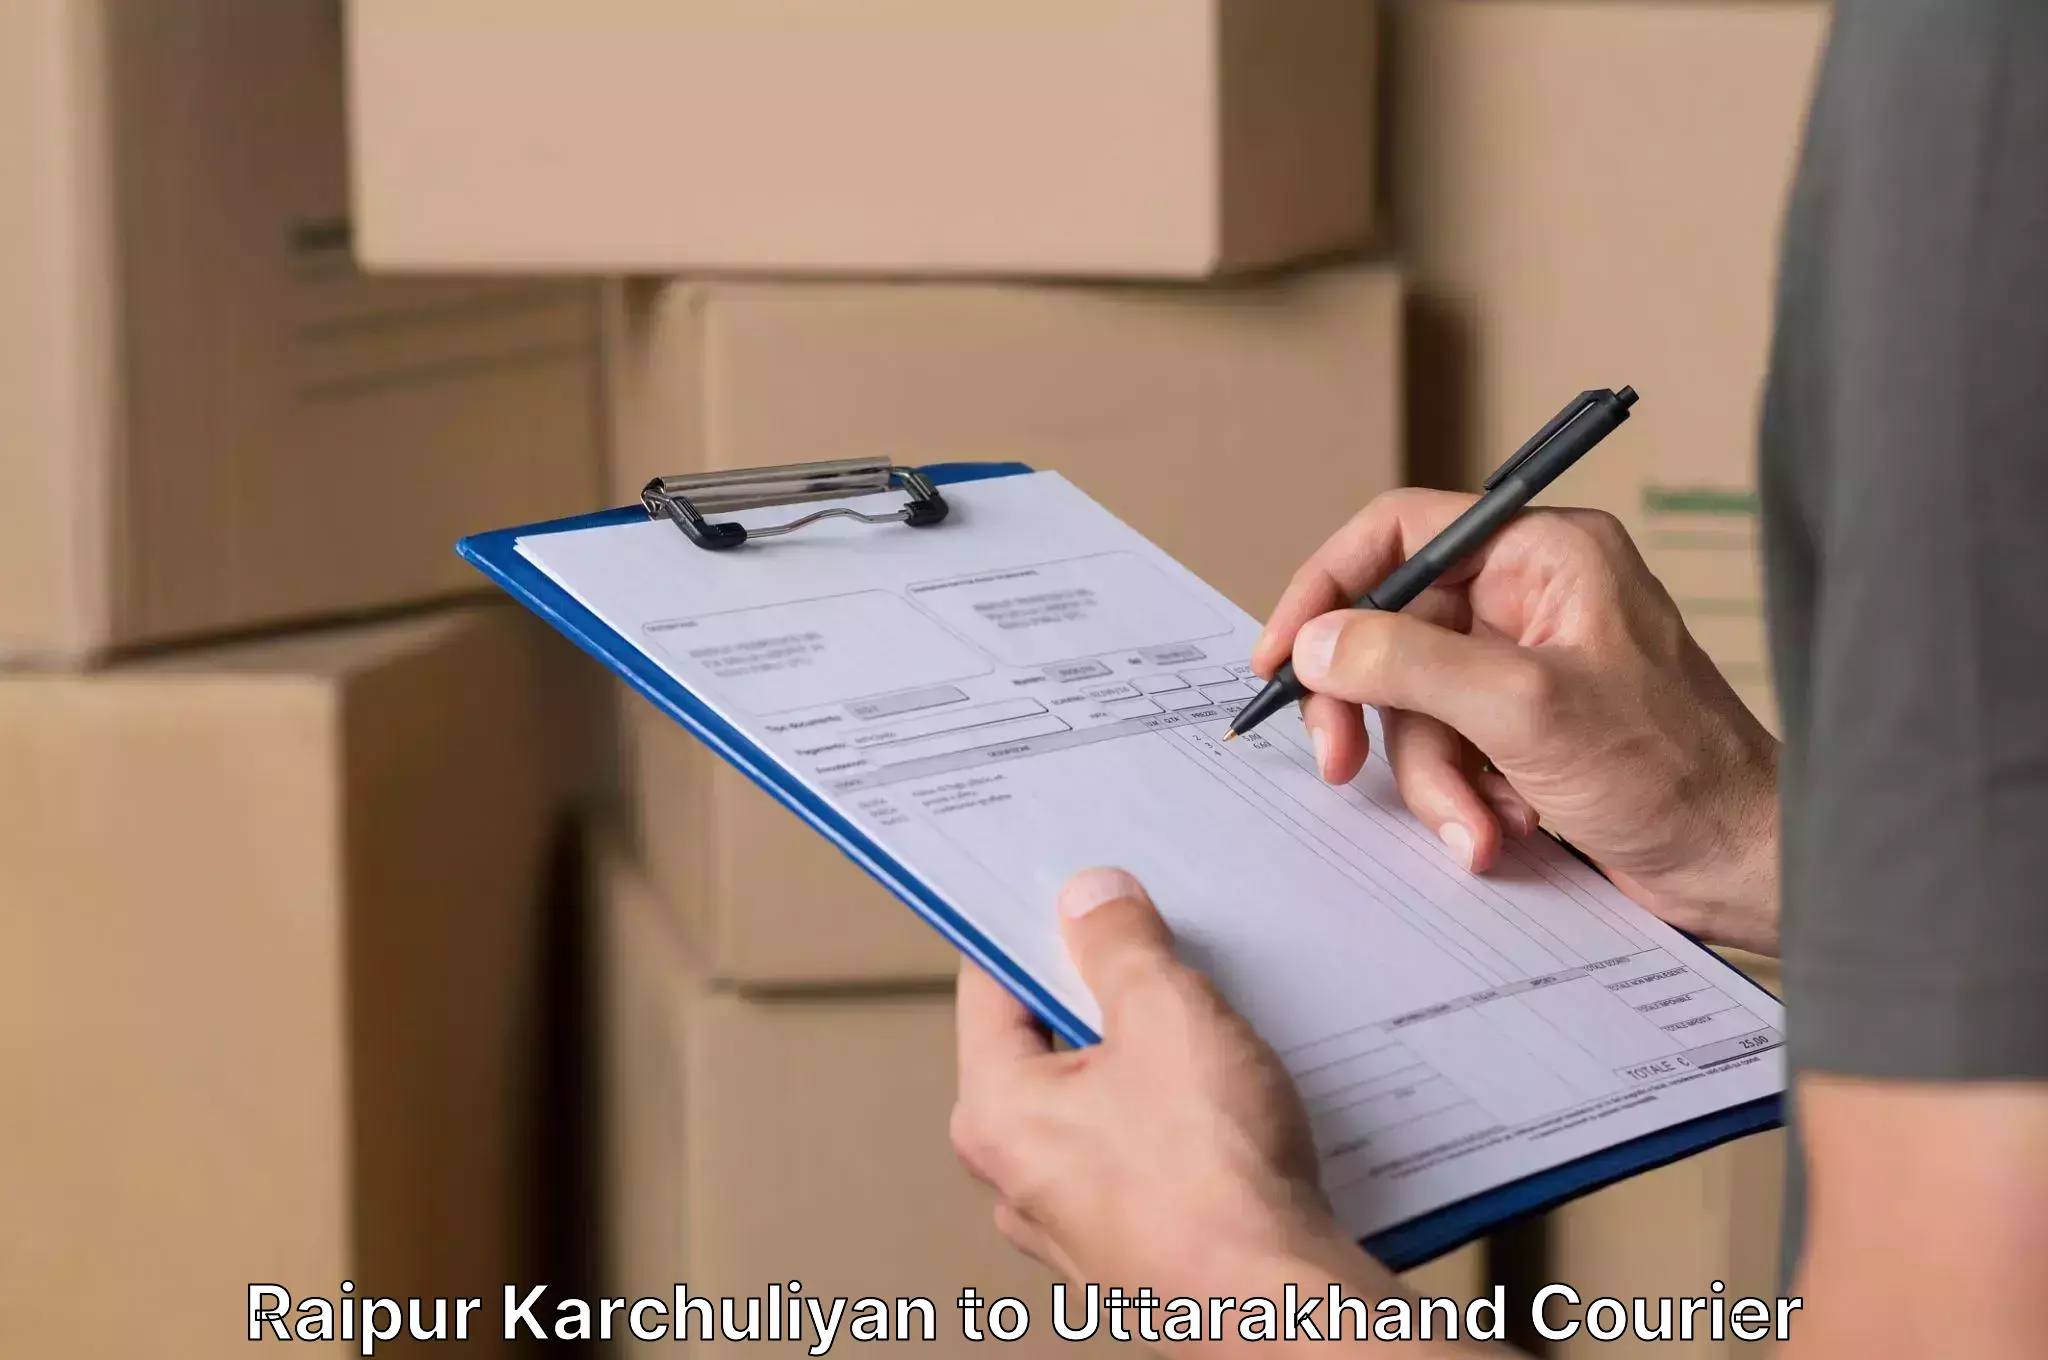 Quality relocation services Raipur Karchuliyan to Pauri Garhwal